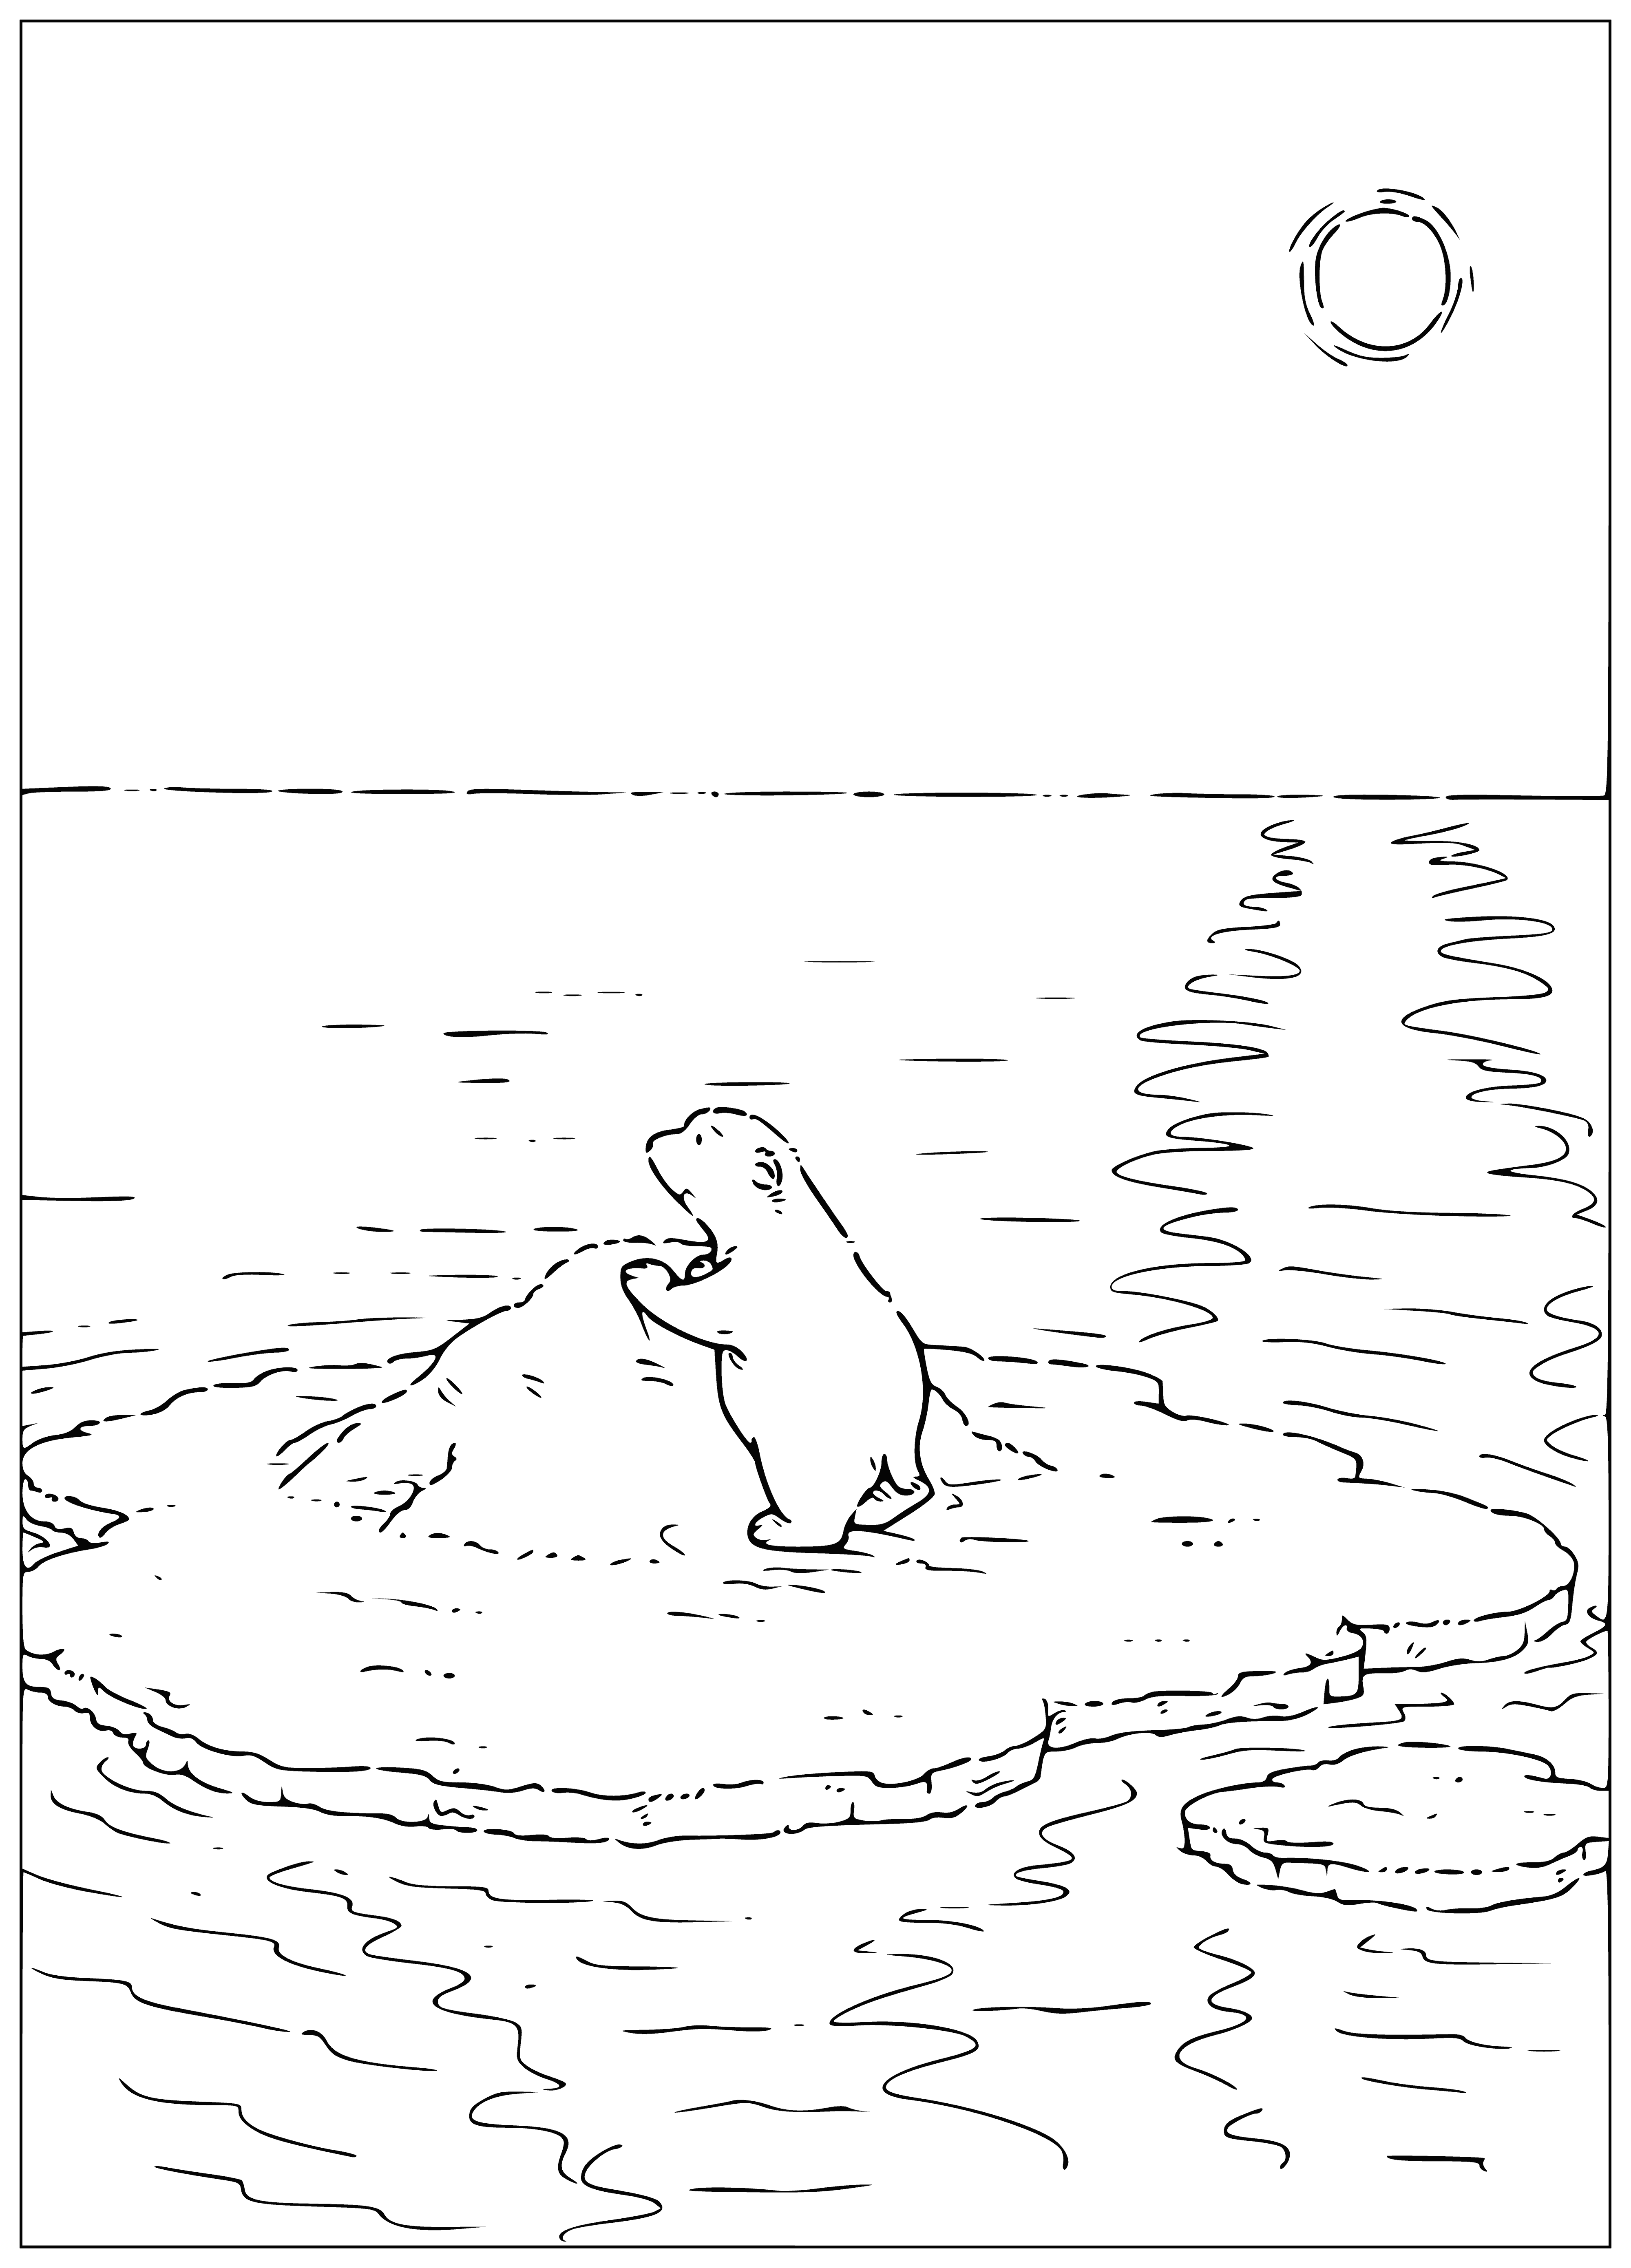 coloring page: Little polar bear sits sad and alone on an ice floe.